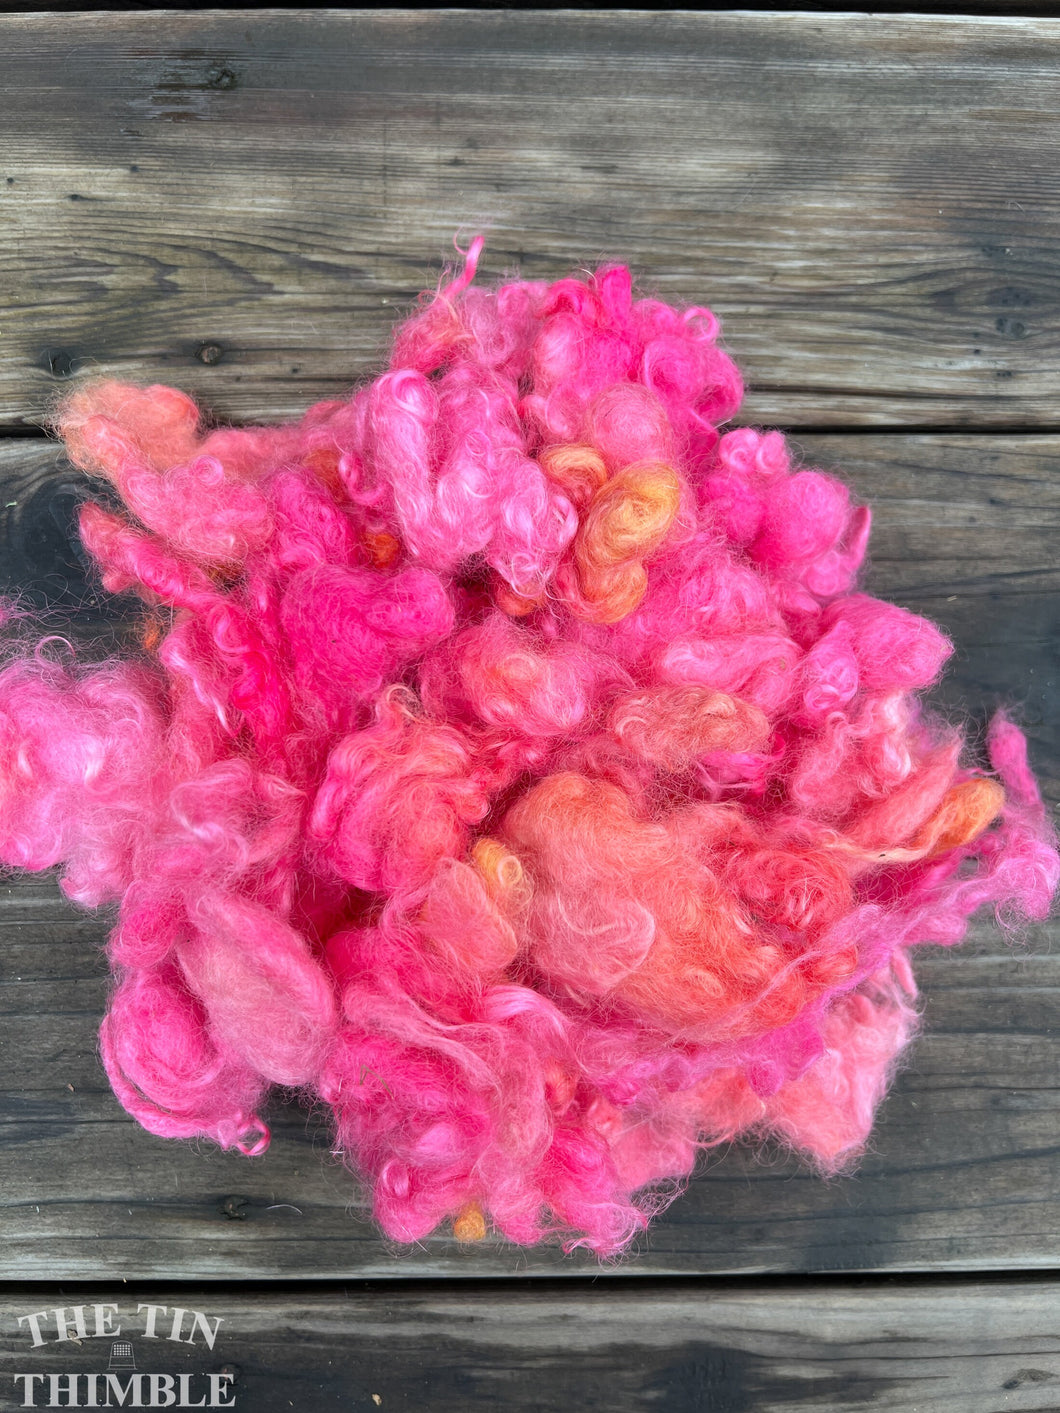 Hand Dyed Mystery Wool Fiber for Needle Felting, Wet Felting, Weaving and Crafts - Pink - 1 Ounce